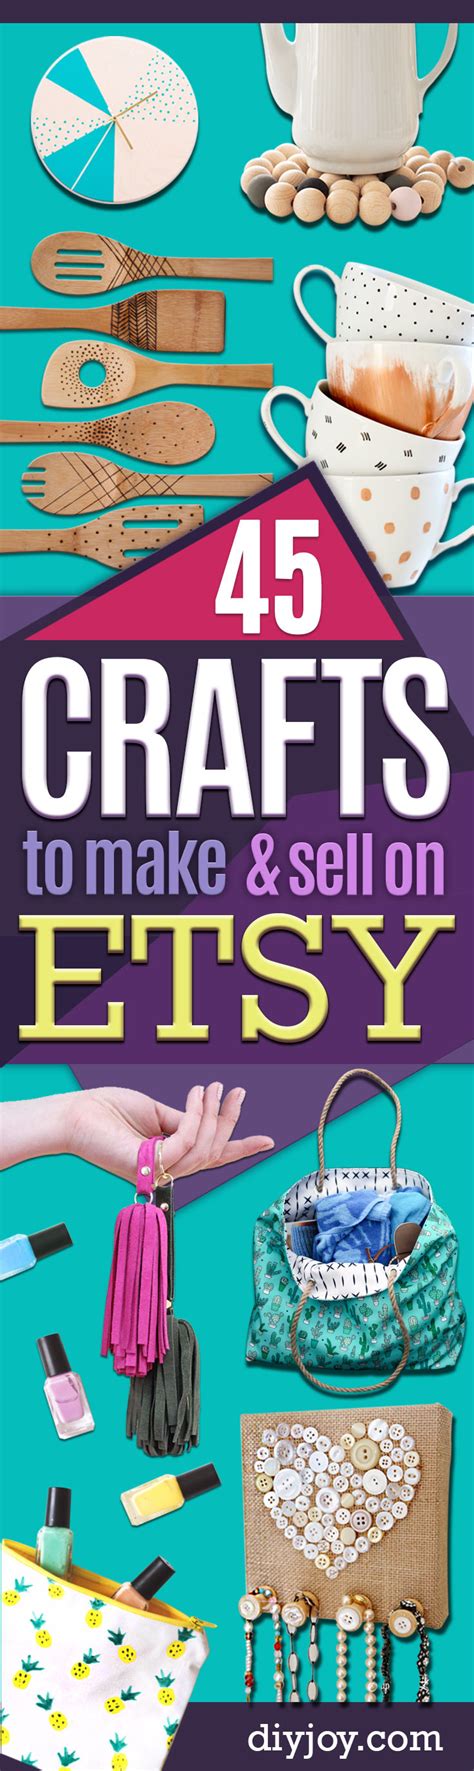 45 Creative Crafts to Make and Sell on Etsy